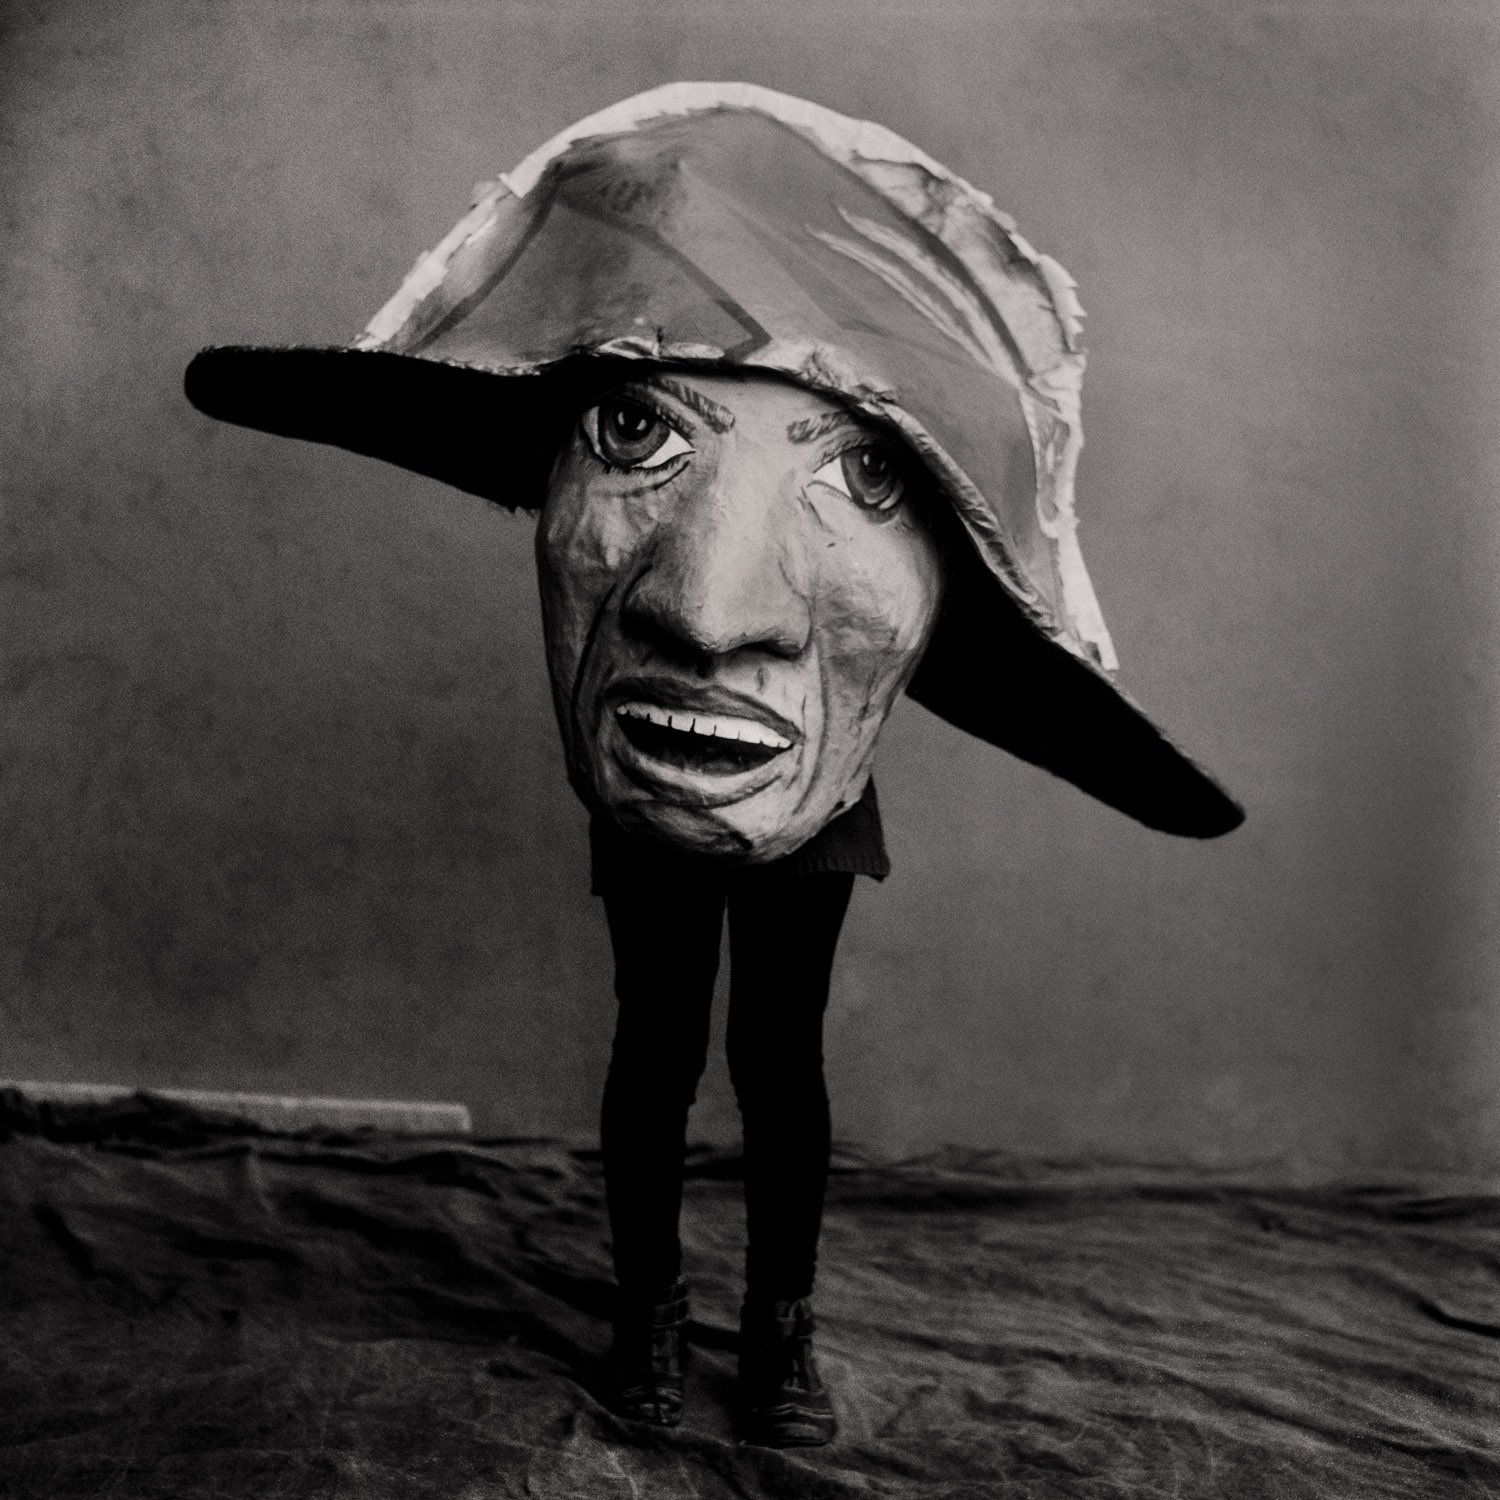     Russell Monk, Big Mask, 2012 &#8211; 2014 

